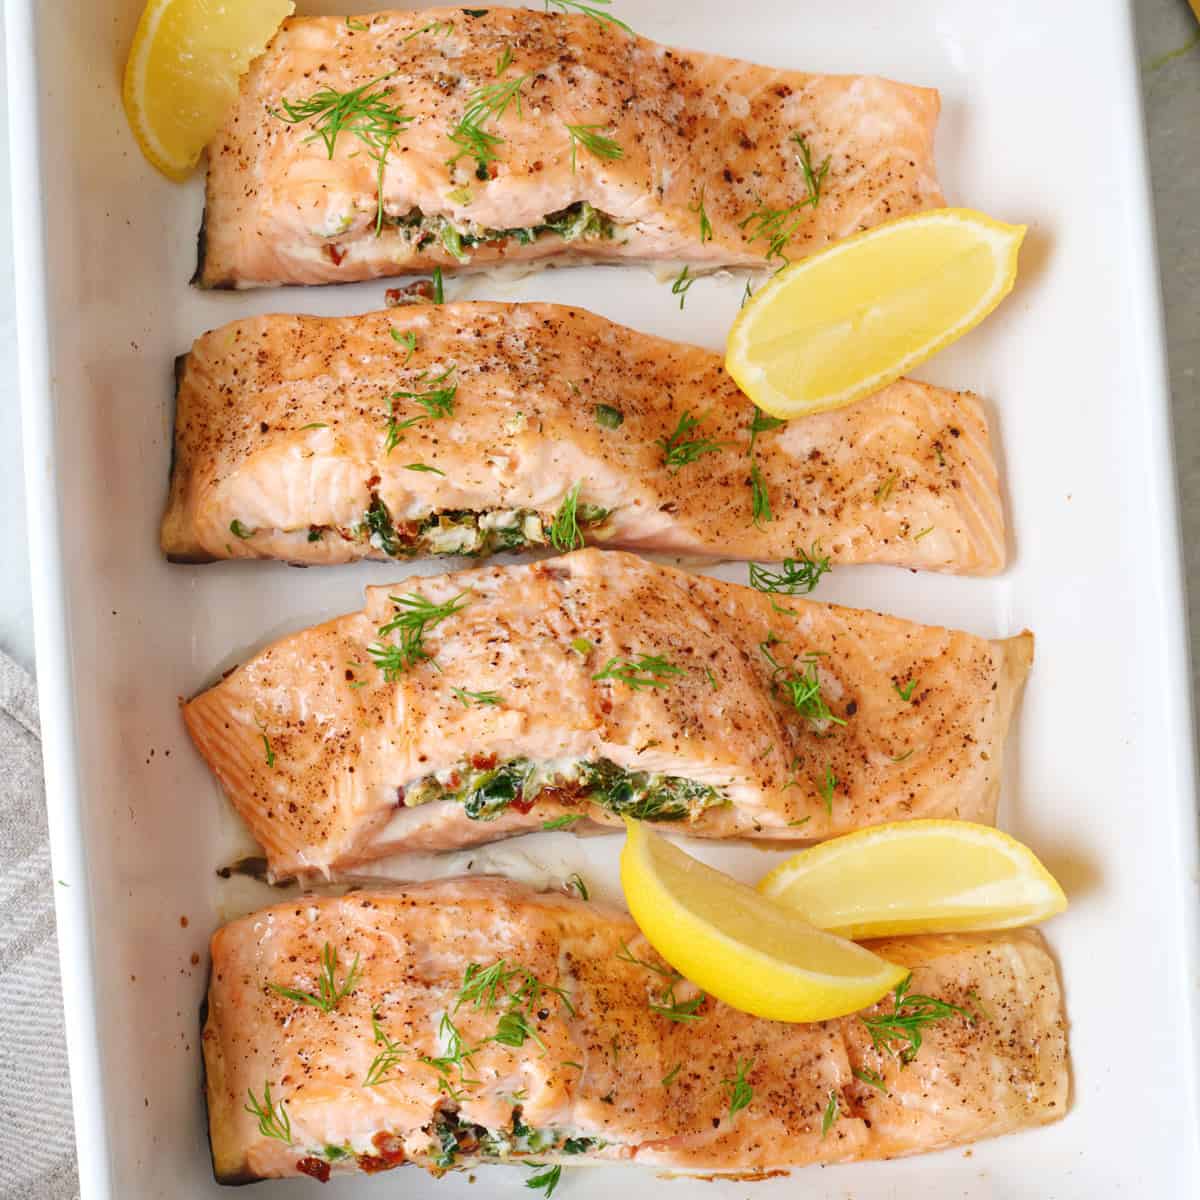 Stuffed baked salmon in a white baking dish garnished with lemon slices.